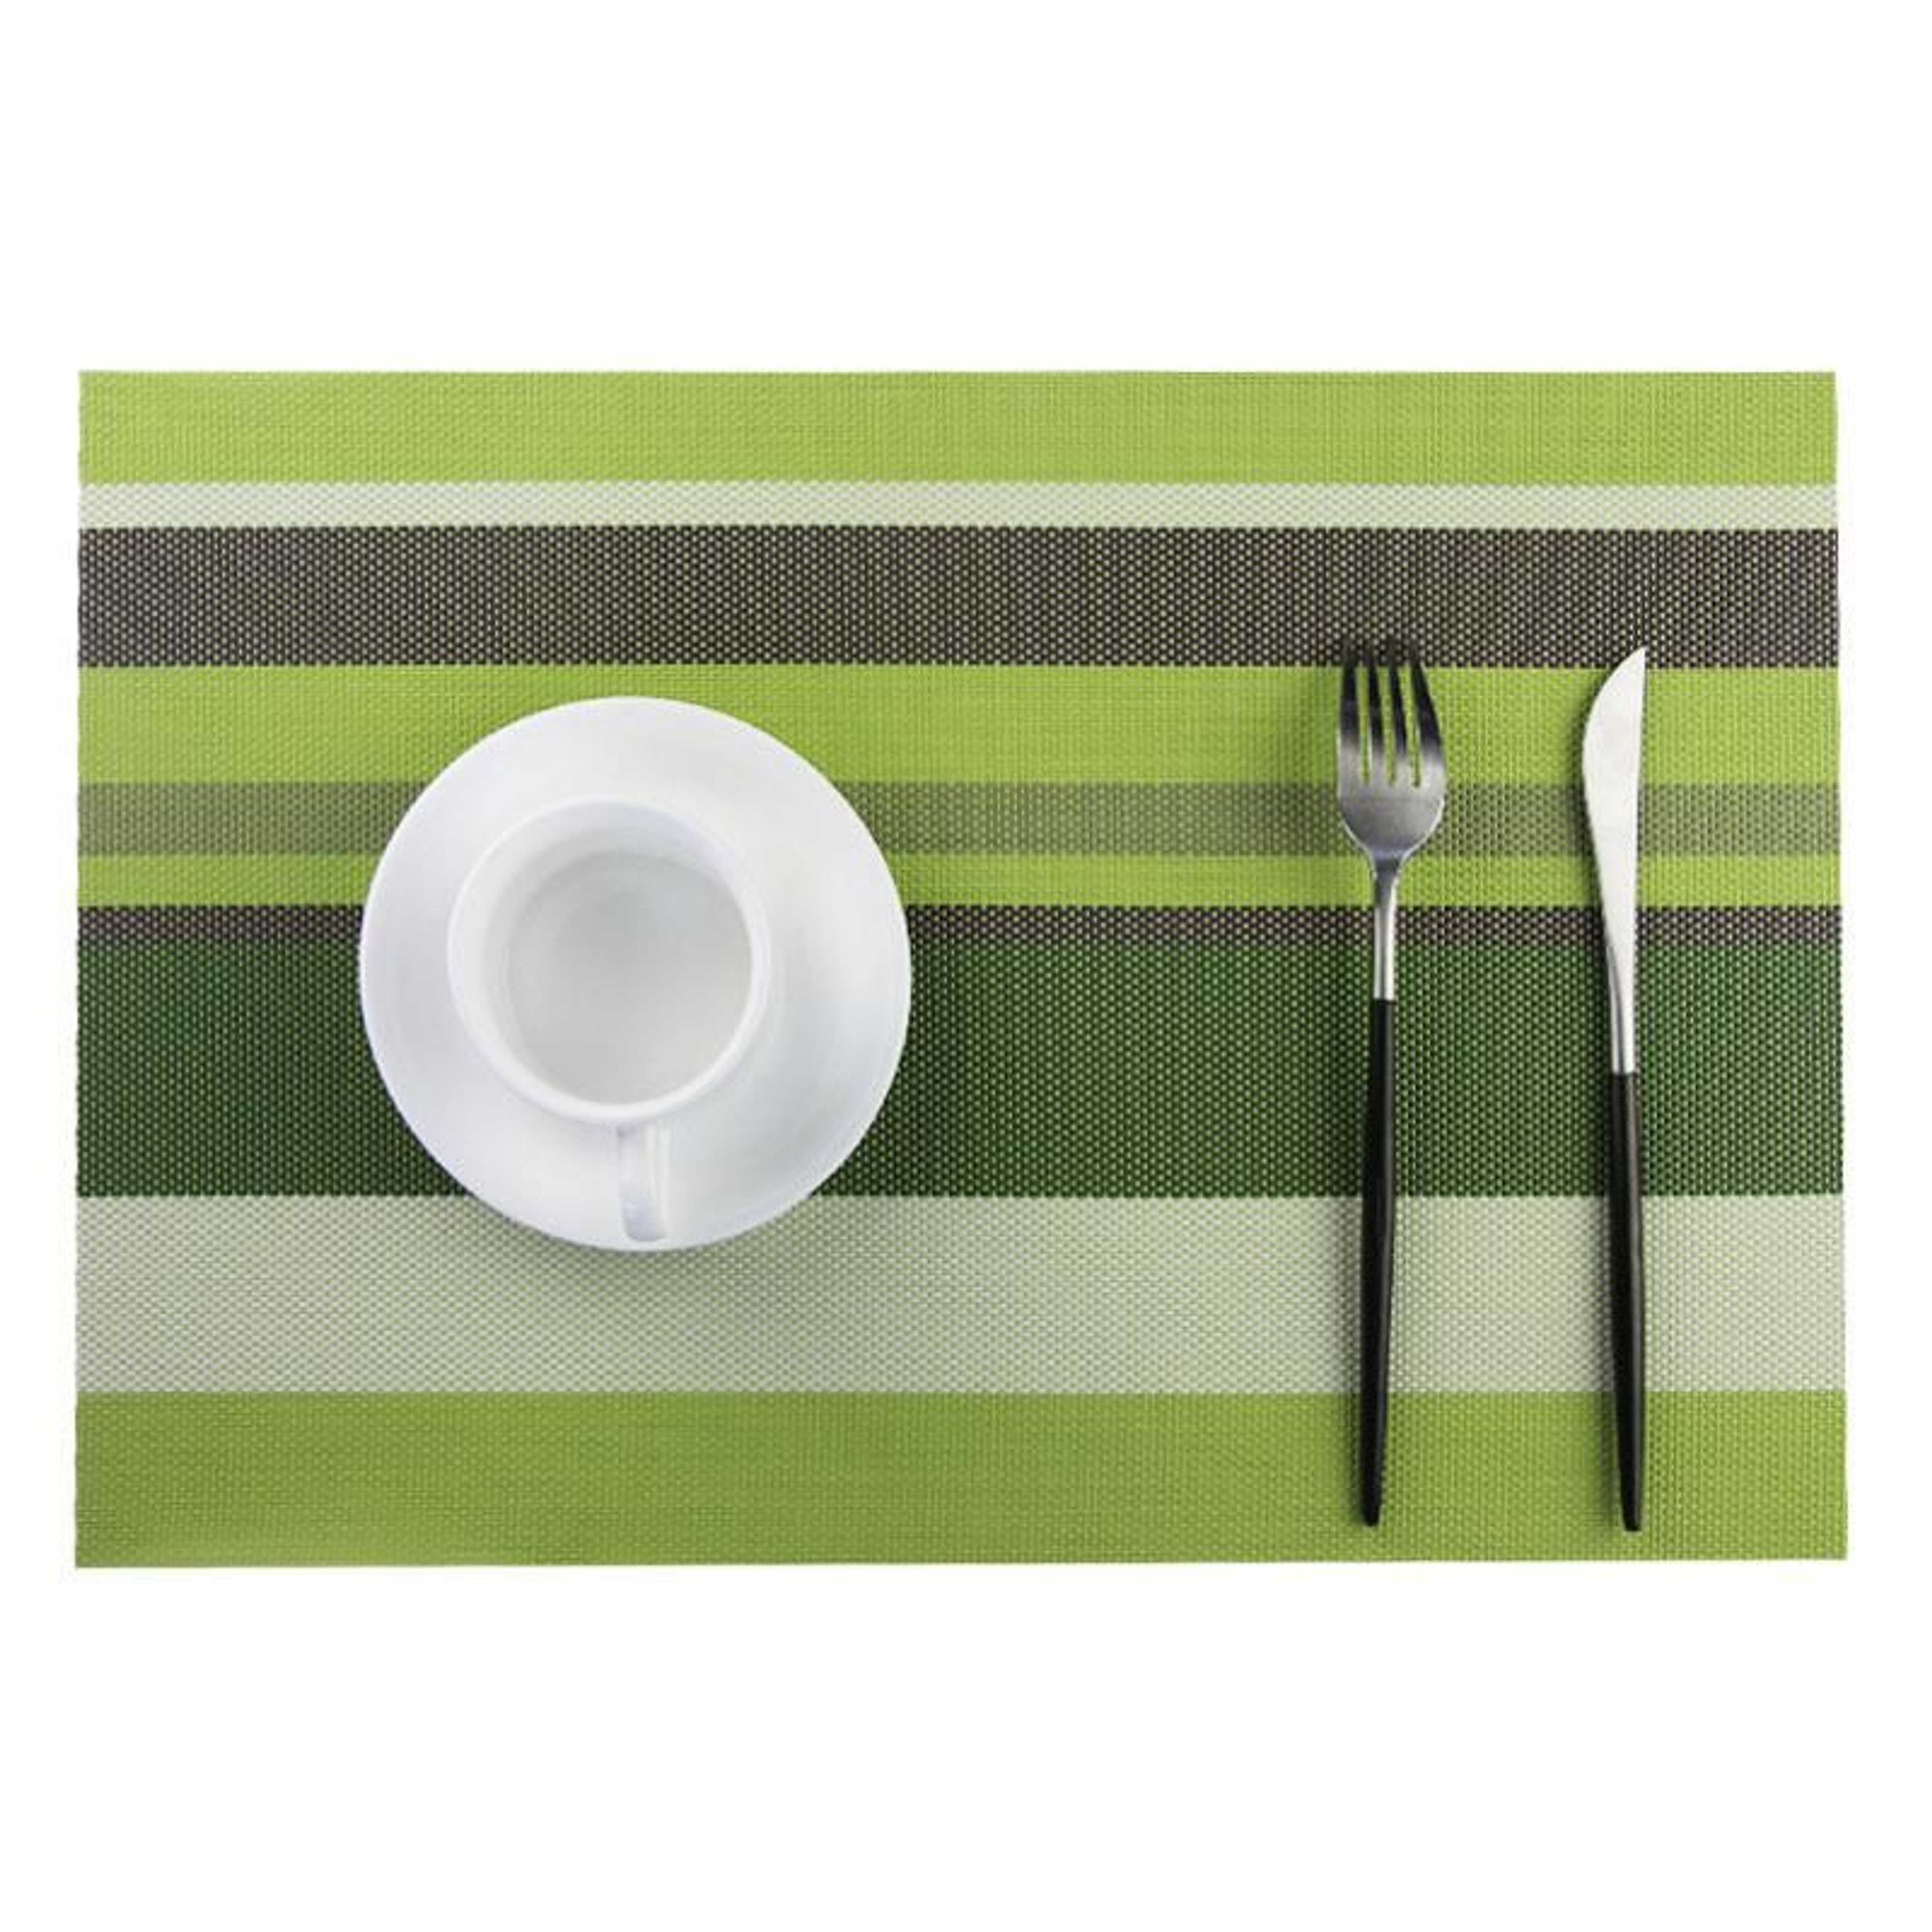 Pack of 02 Antibacterial Waterproof Printed Place Mats for Kitchen Cupboards, Drawers, Tables 45x160cm